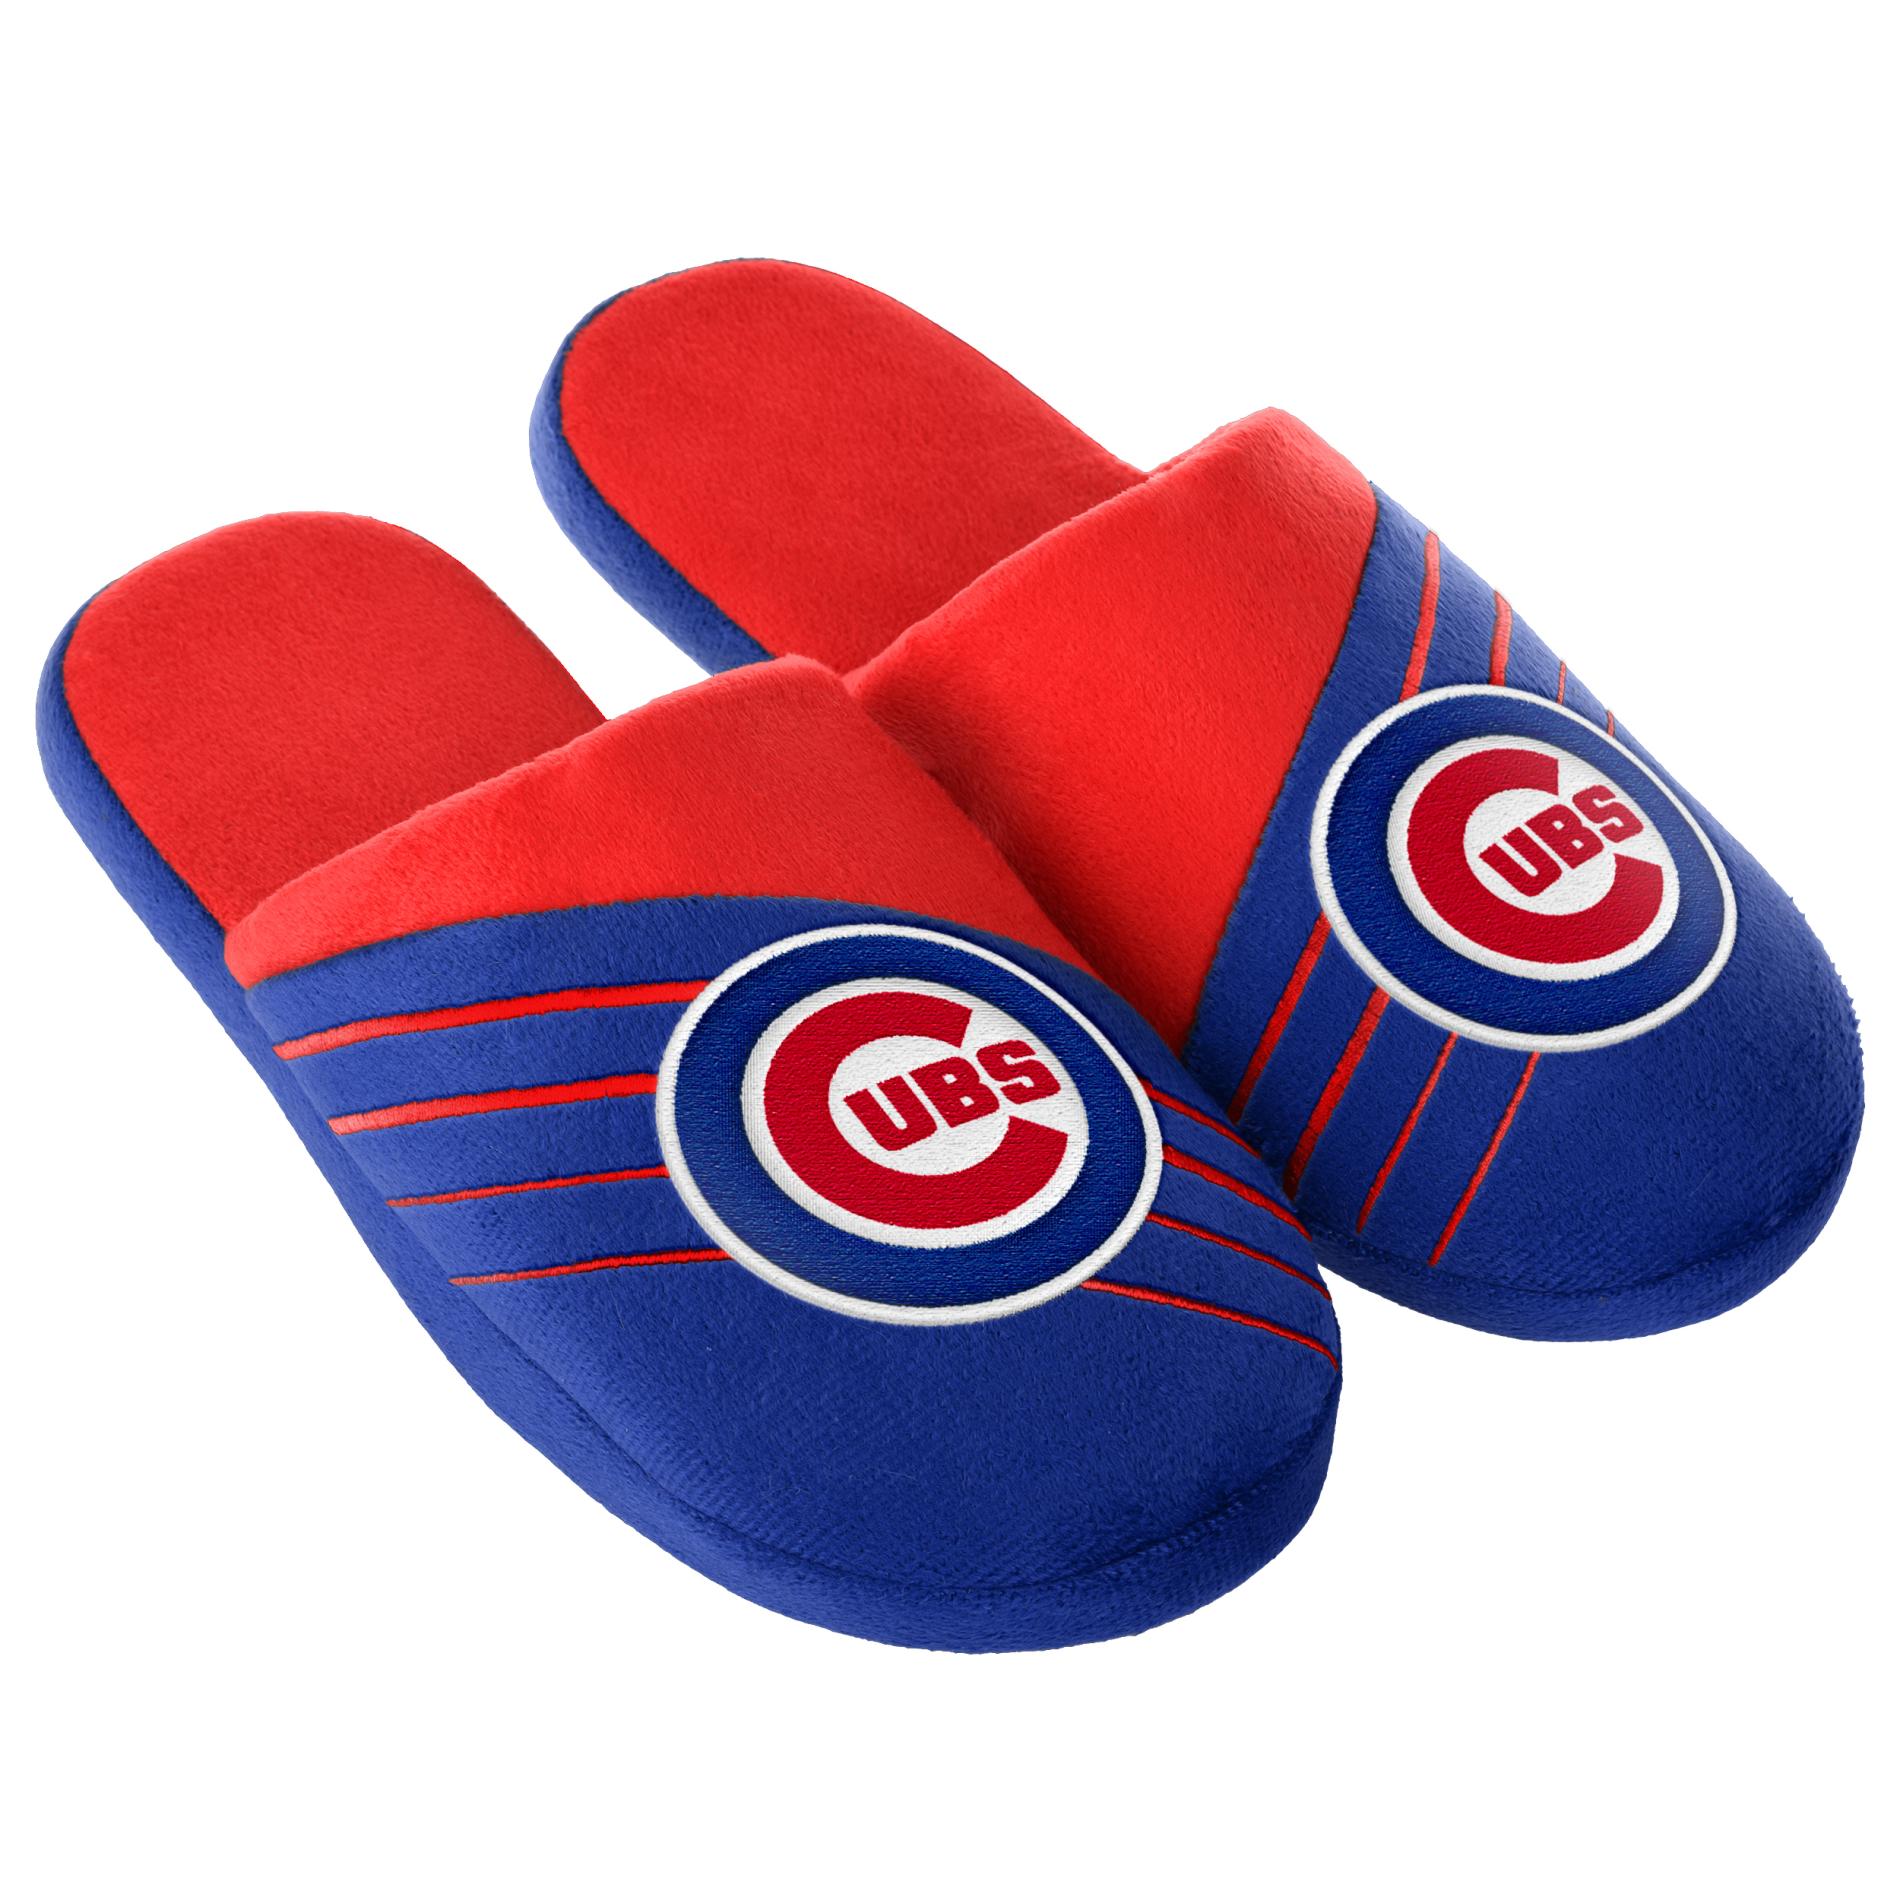 MLB Men's Chicago Cubs Blue/Red Slippers